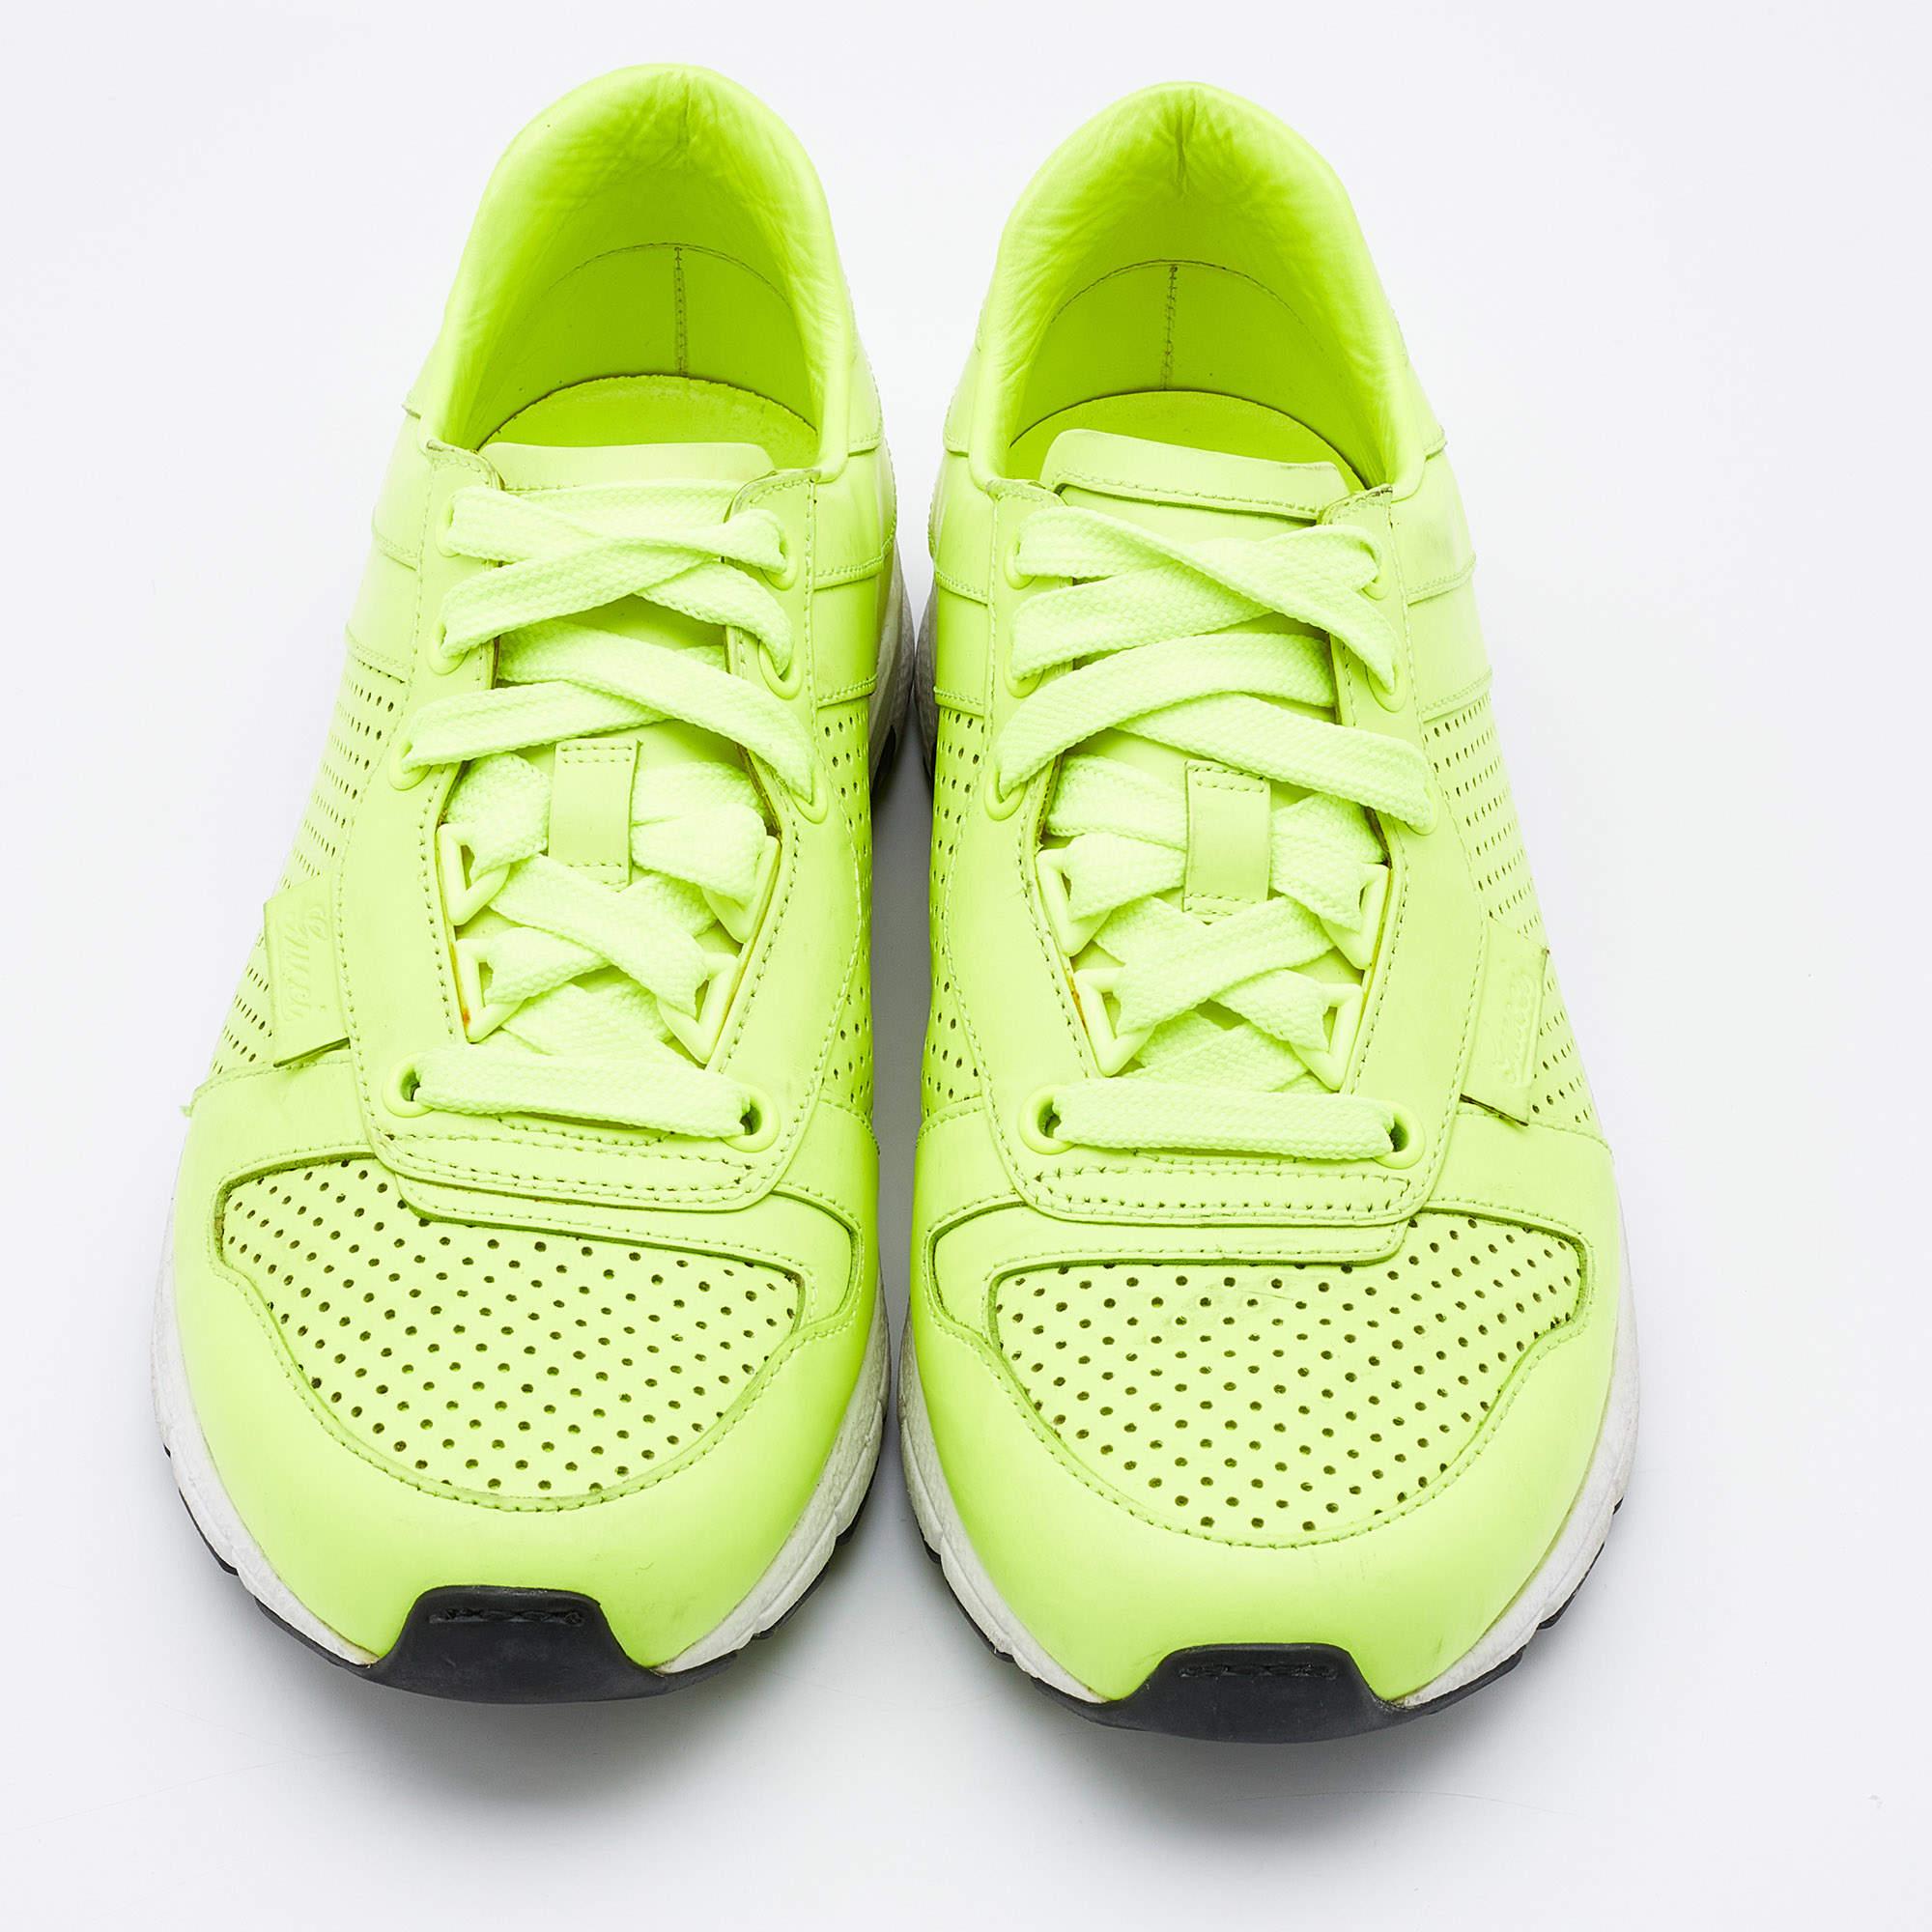 Gucci Neon Green Perforated Leather Lace Up Sneakers Size 38 For Sale 3